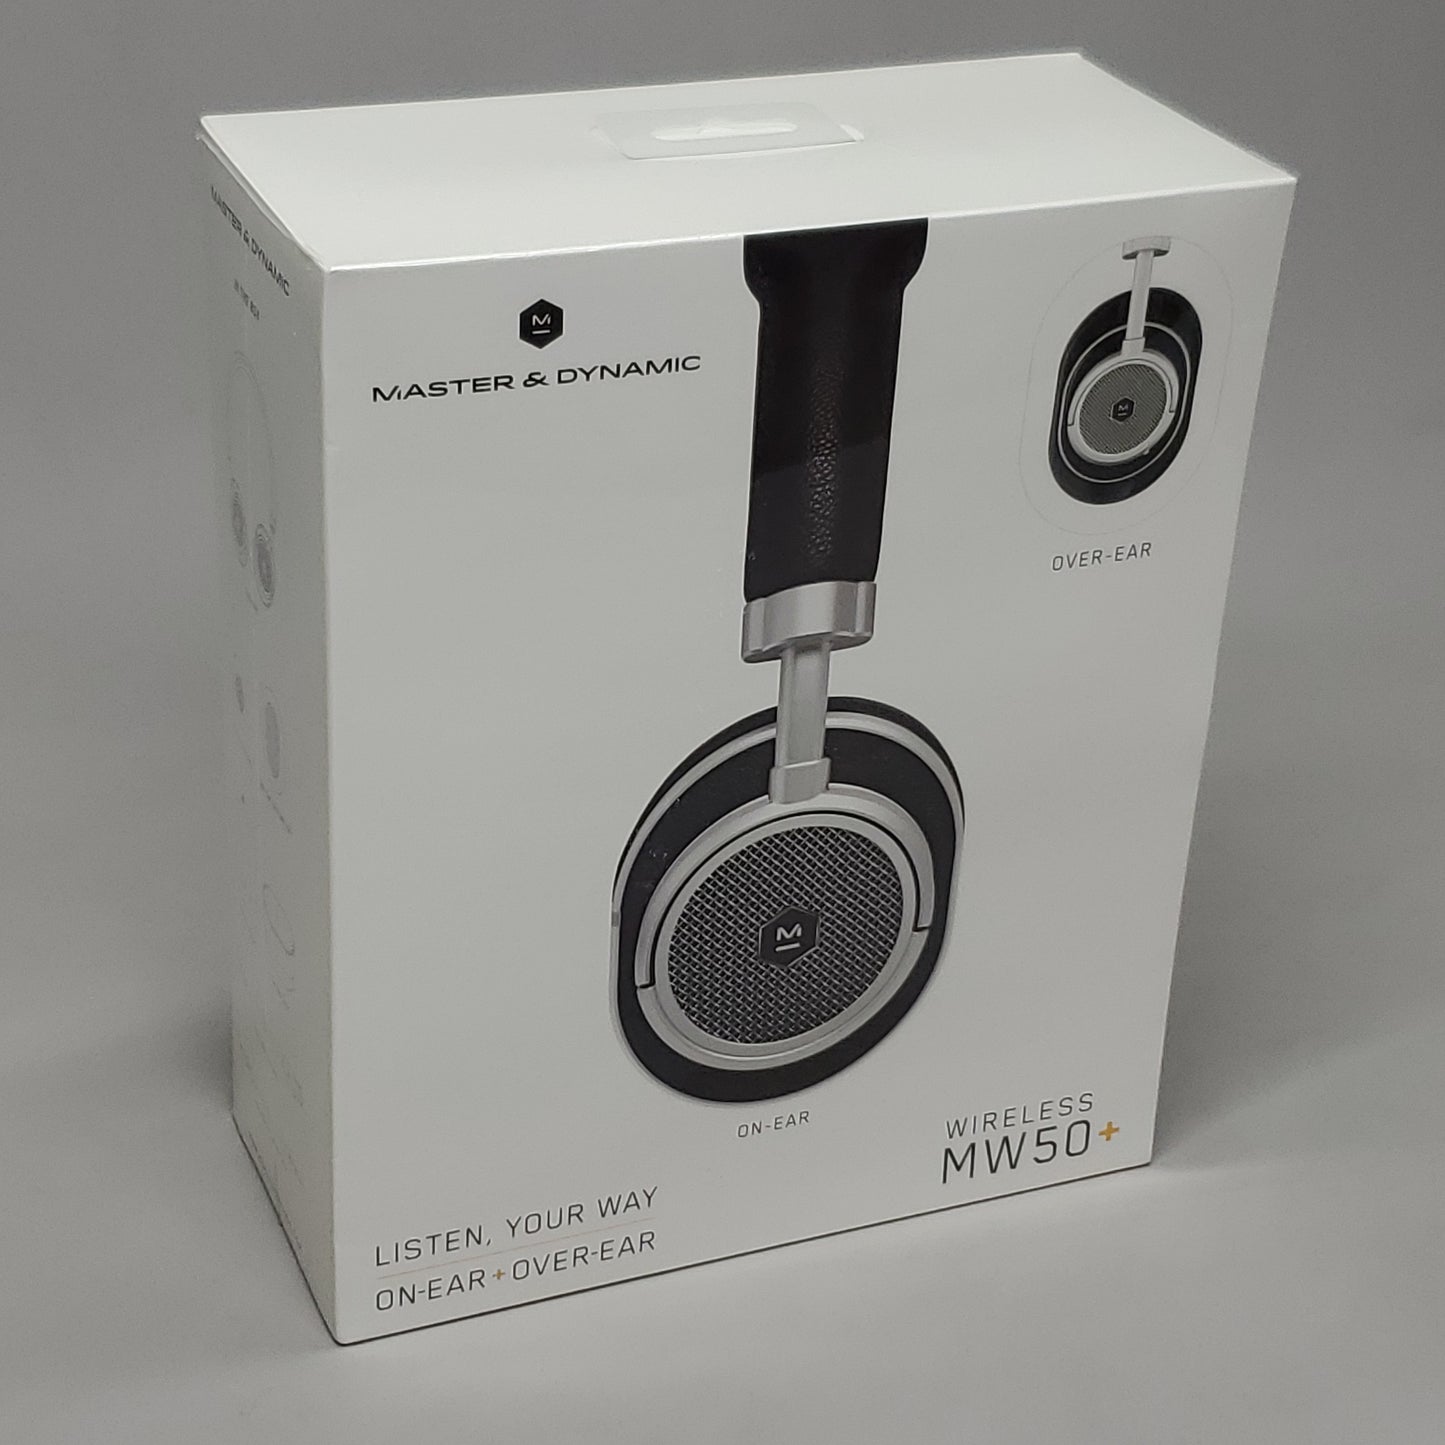 MASTER & DYNAMIC 2-In-1 Wireless Headphones Noise Isolation 16HR Battery Black MW50+ (New Sealed)